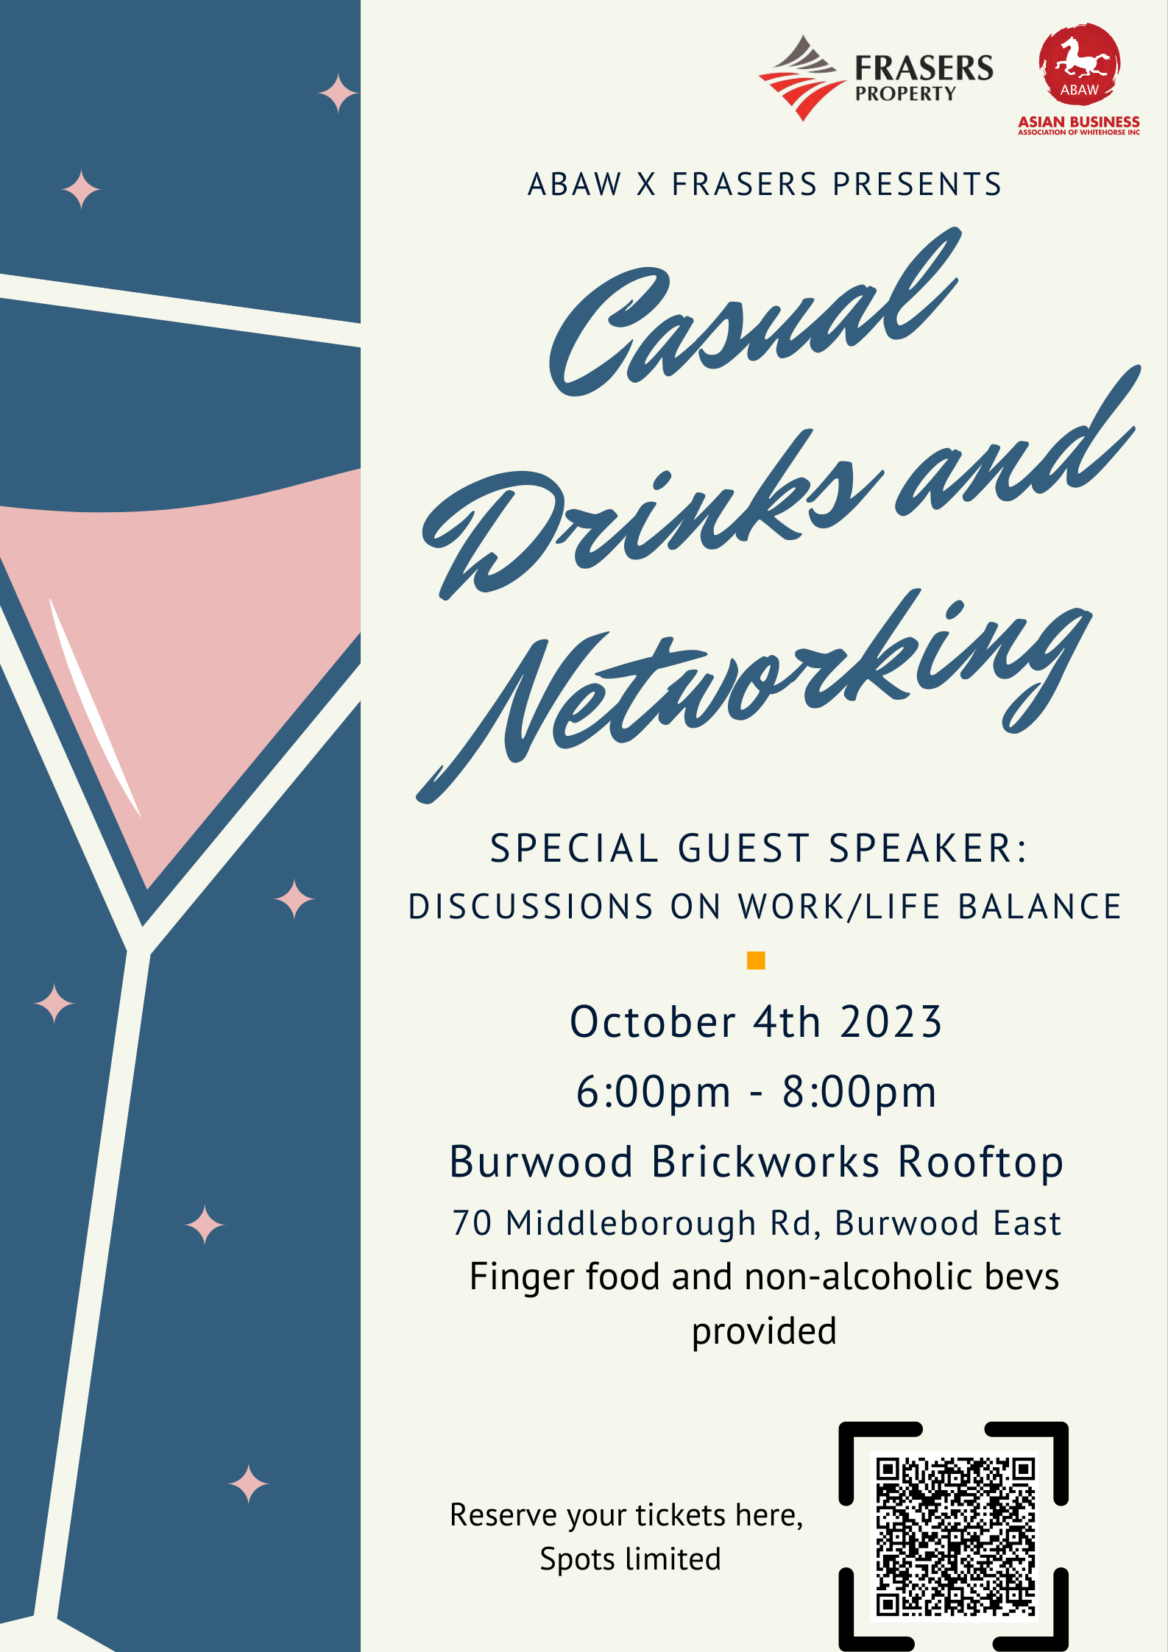 ABAW X FRASERS NETWORKING